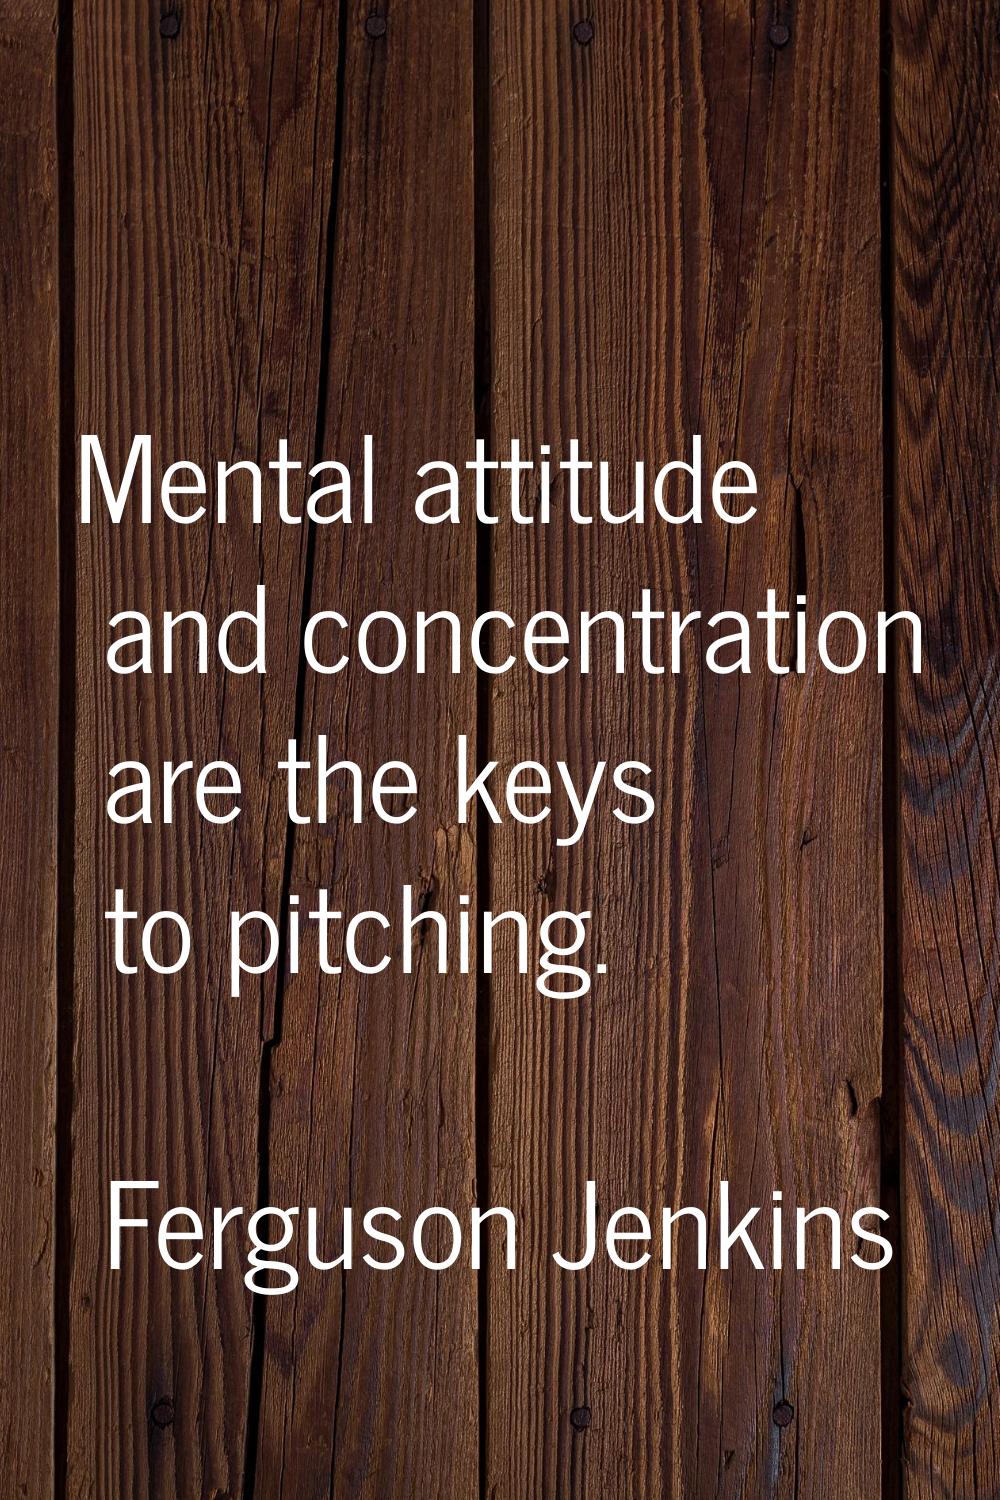 Mental attitude and concentration are the keys to pitching.